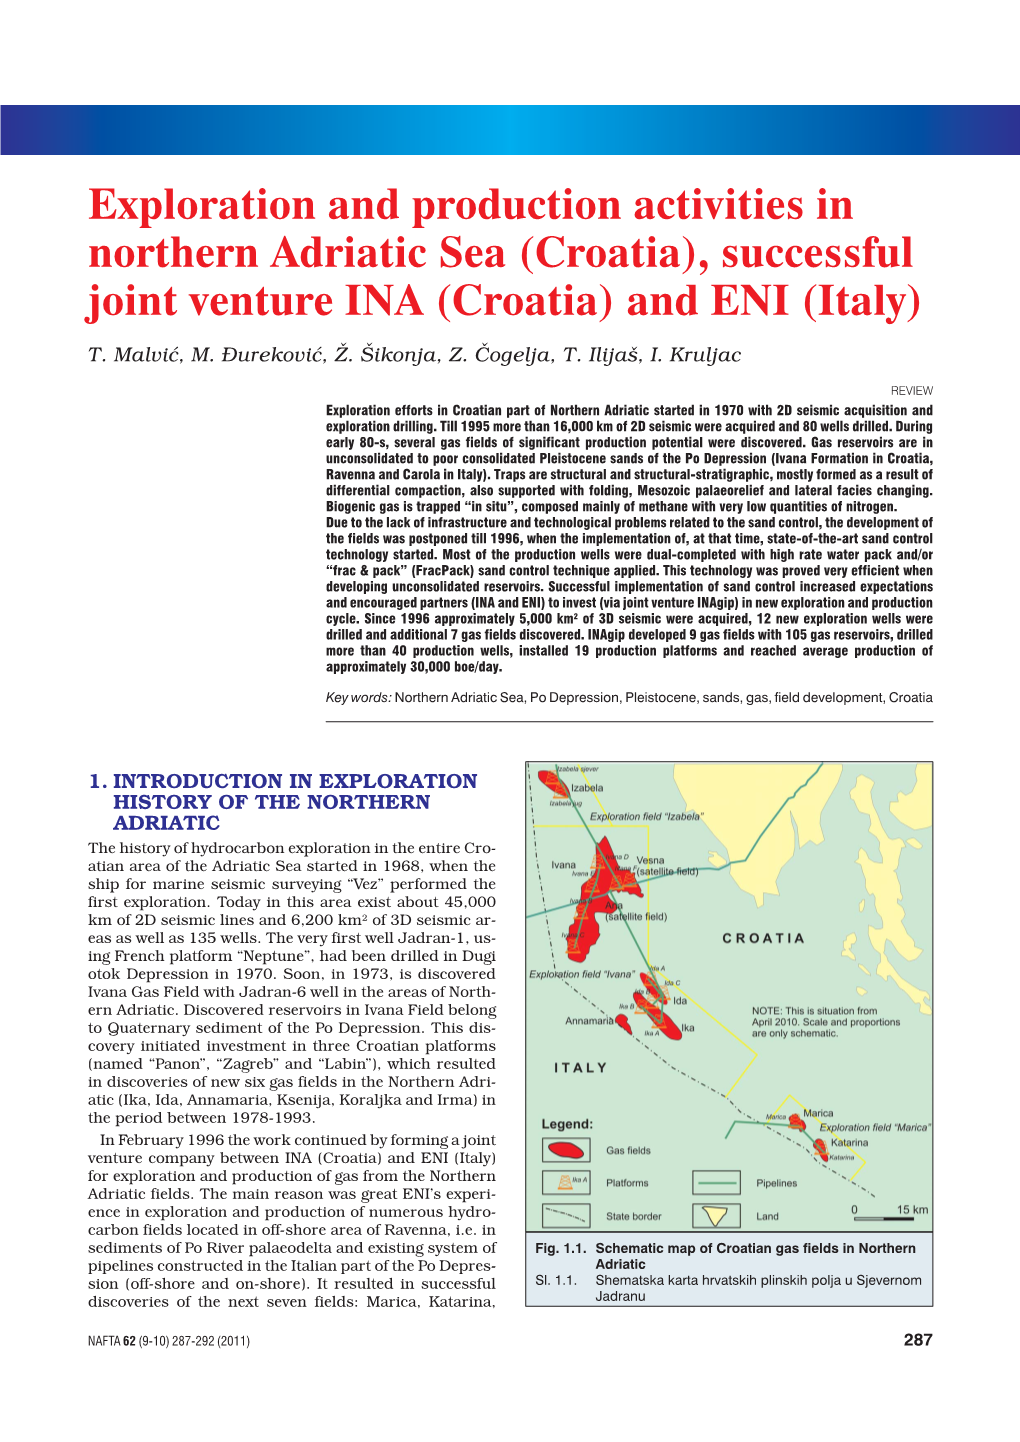 Exploration and Production Activities in Northern Adriatic Sea (Croatia), Successful Joint Venture INA (Croatia) and ENI (Italy)